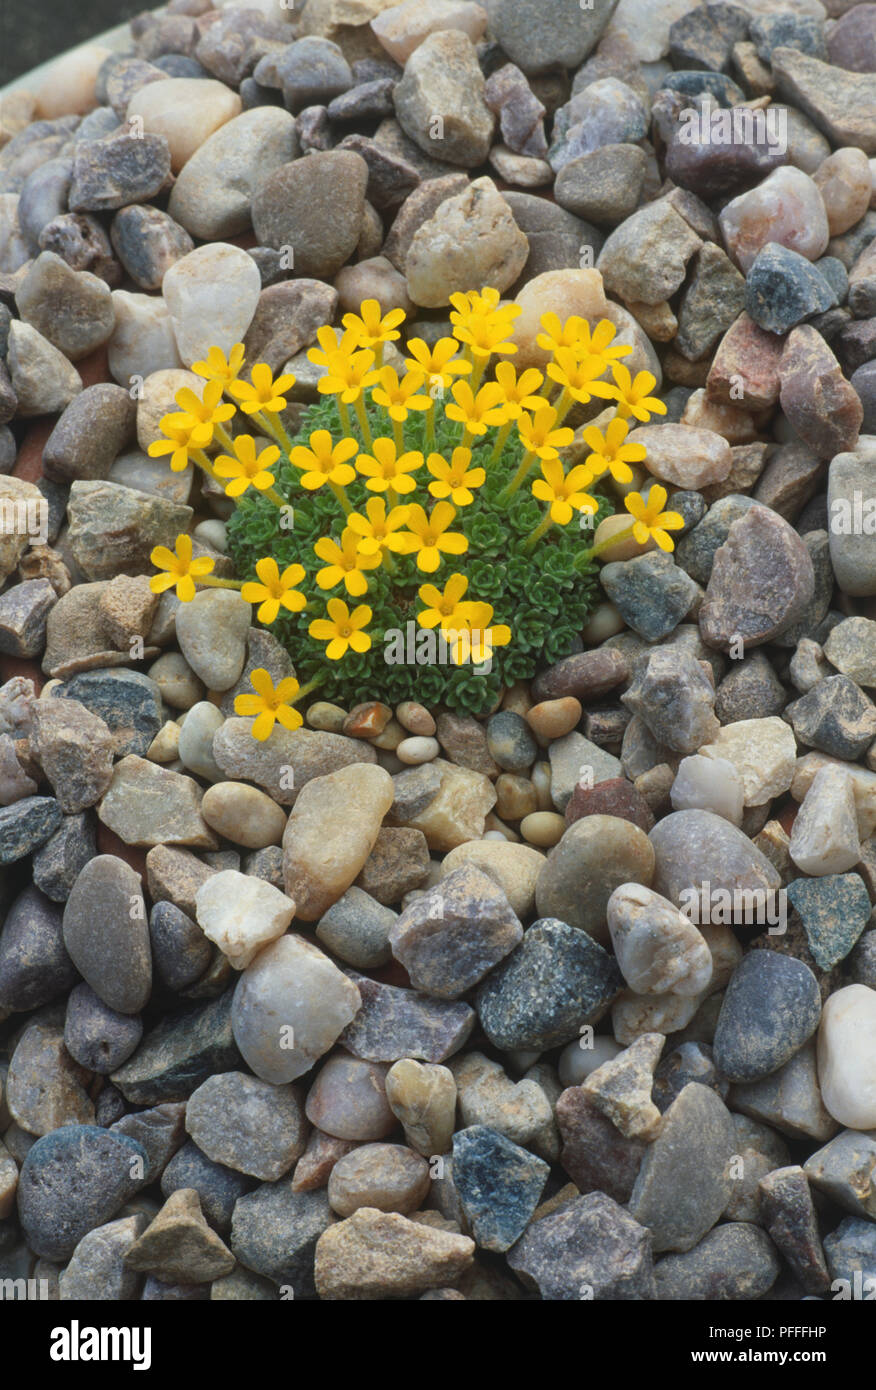 Dionysia michauxii, cluster of tiny yellow flowers with green foliage, growing amid pebble bed Stock Photo